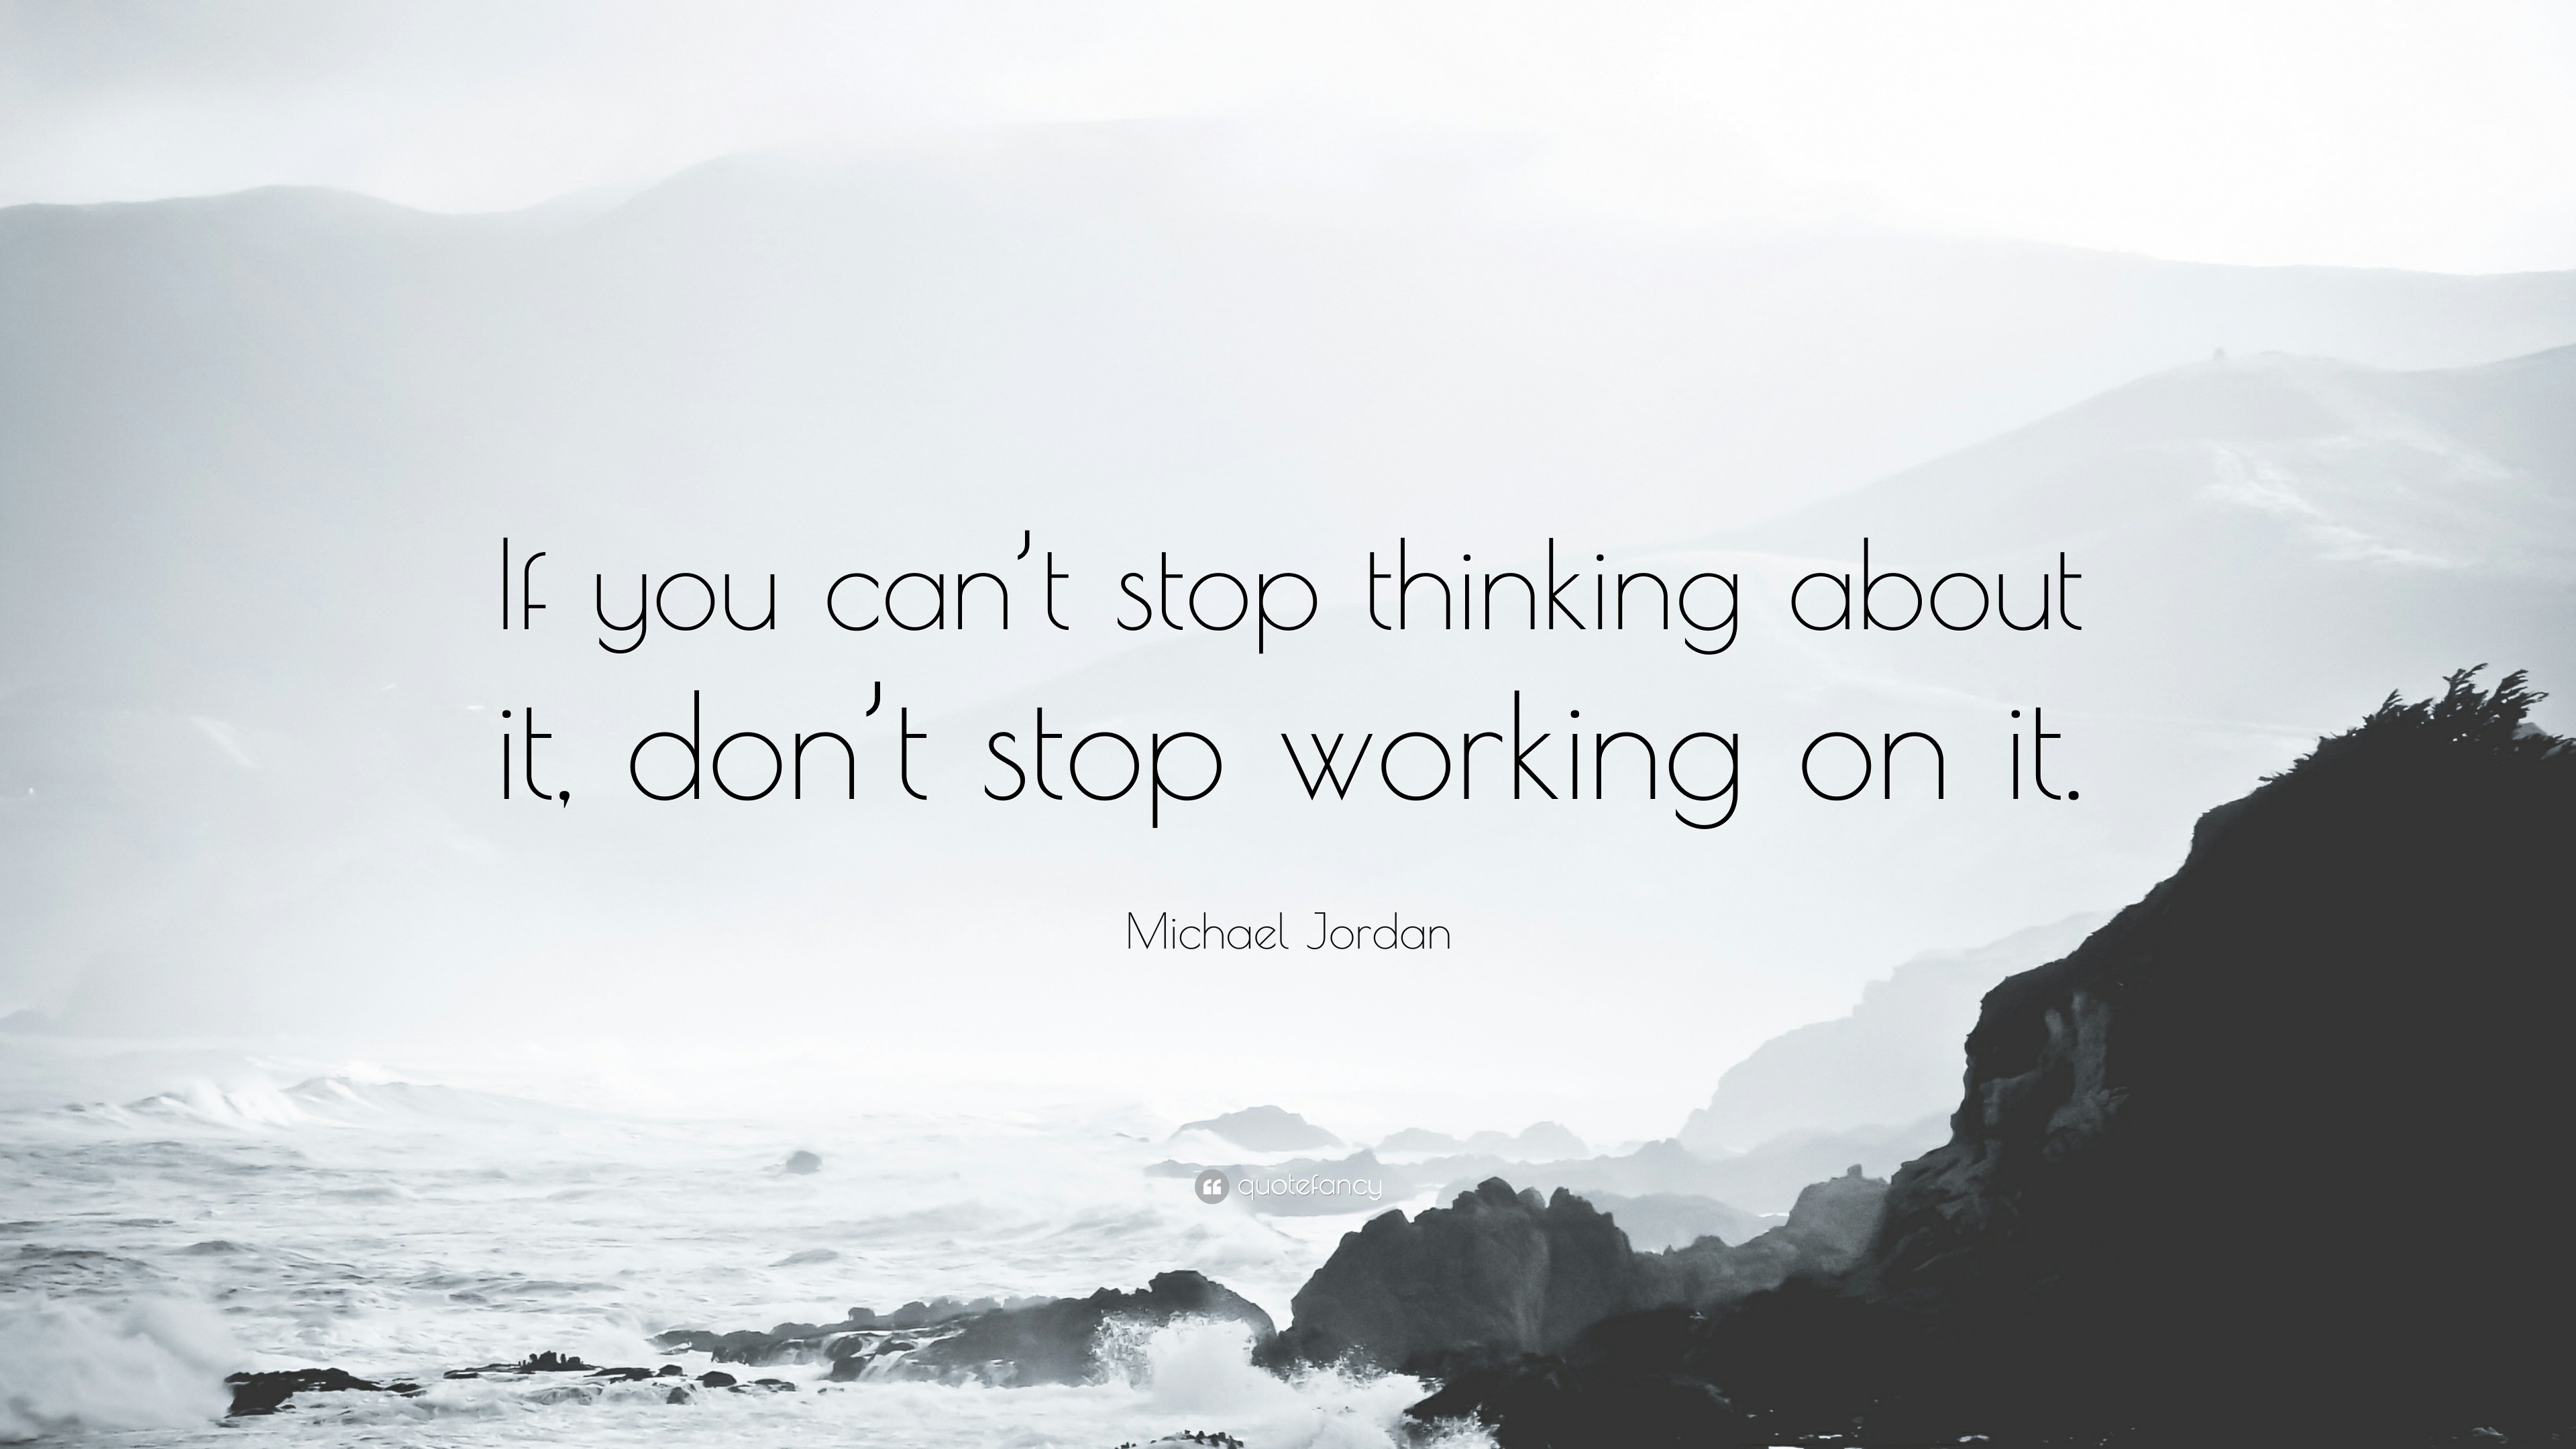 Michael Jordan Quote: “If you can’t stop thinking about it, don’t stop